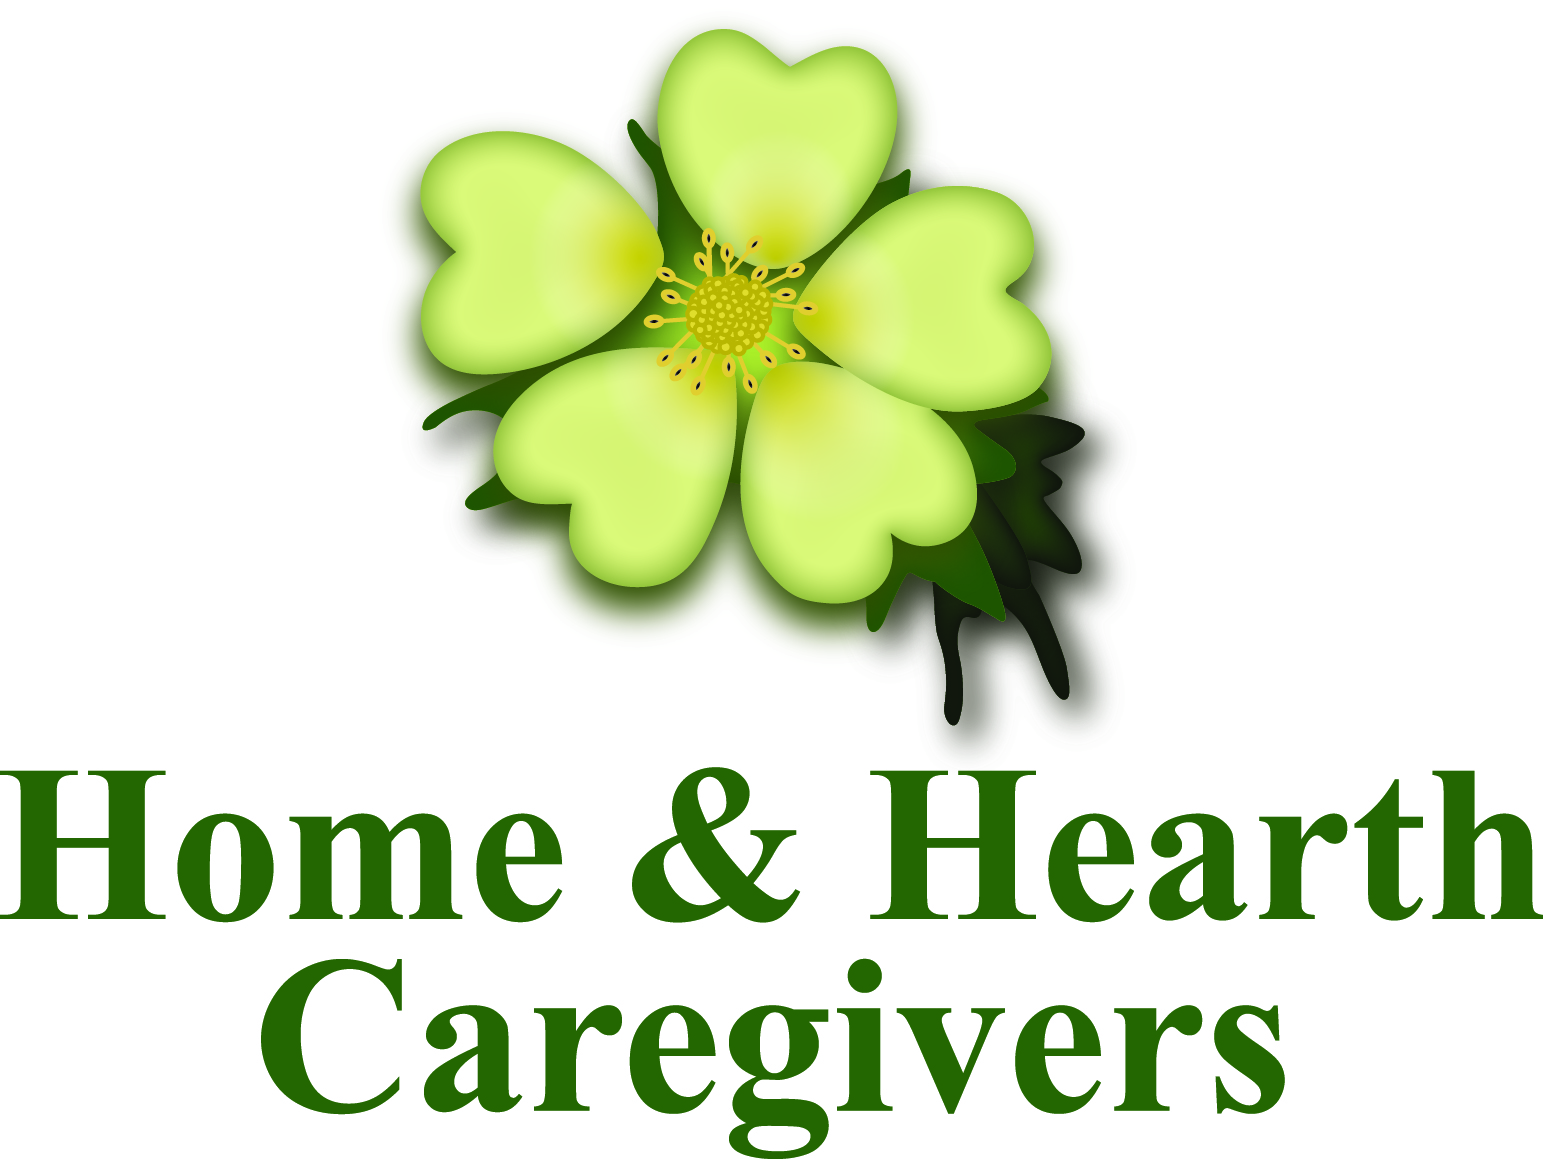 Home & Hearth Caregivers Division of Parker Cromwell Healthcare Logo